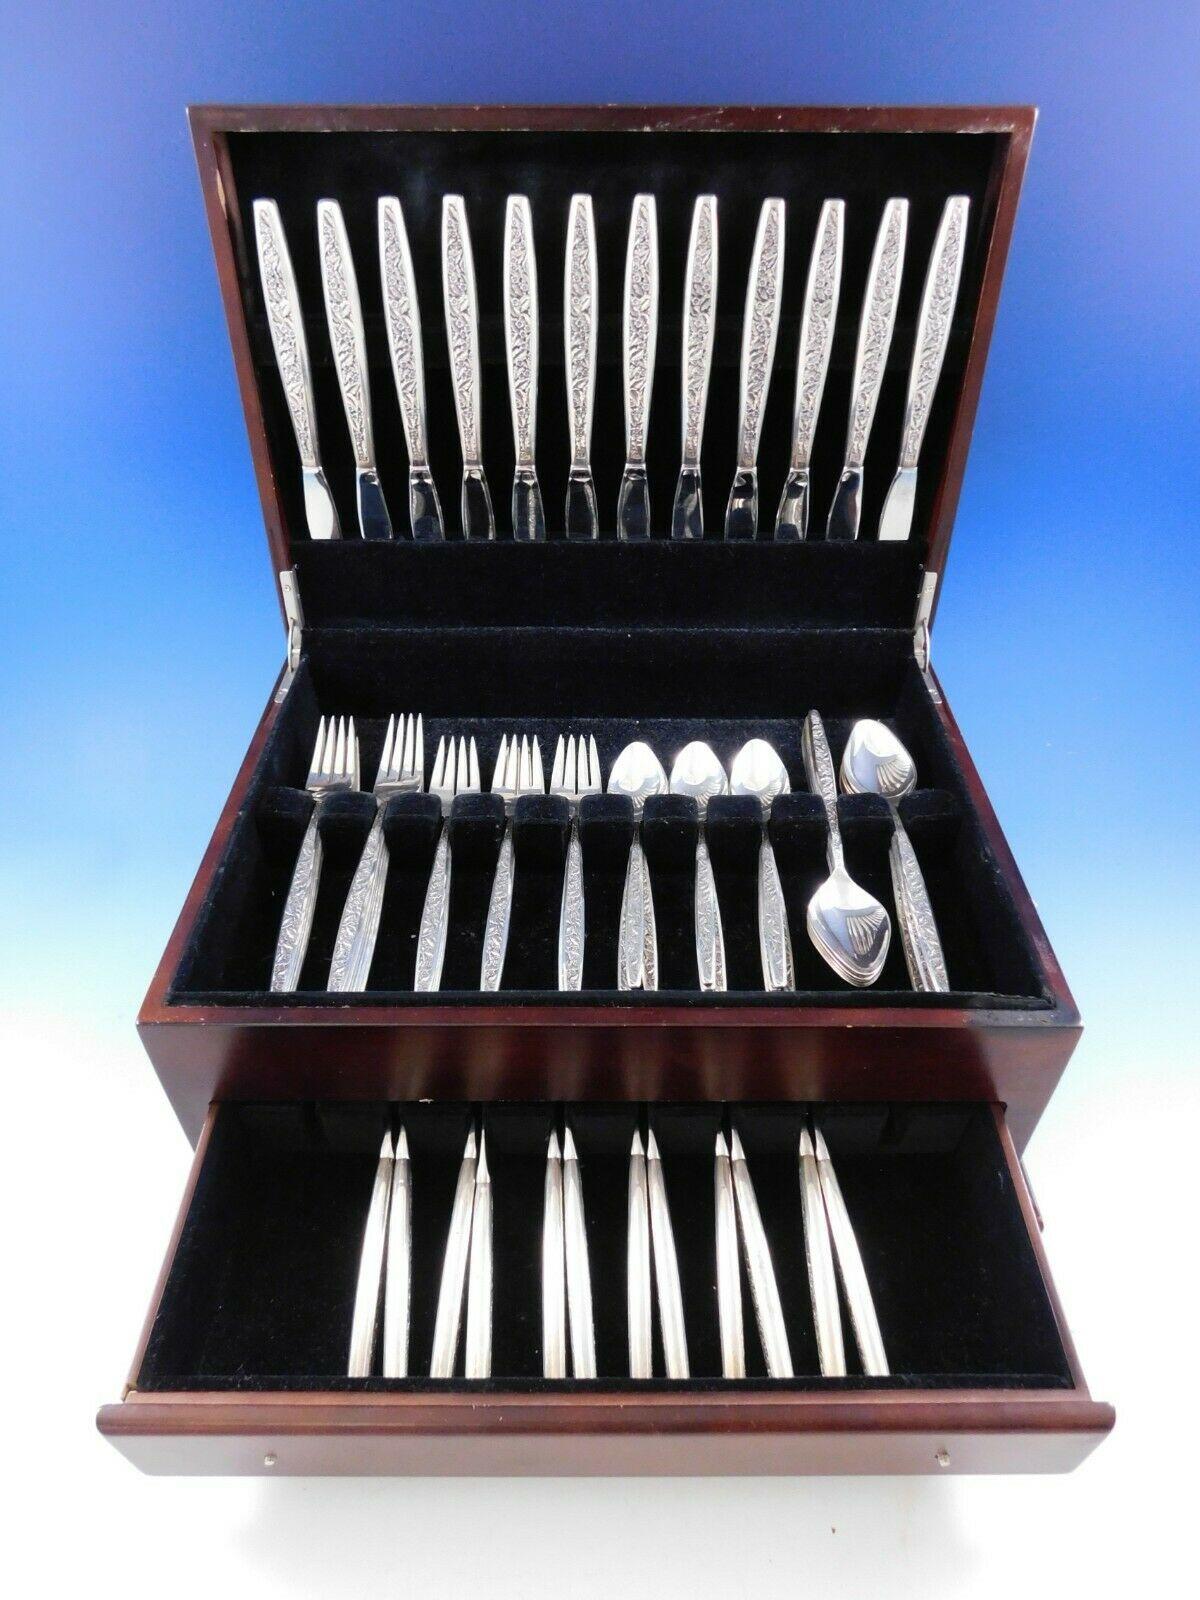 Valencia by International Sterling silver flatware set, 72 pieces. The Valencia pattern was introduced in the year 1964 and features a contemporary elongated handle with an all-over decorative floral & leaf pattern on the front. This set